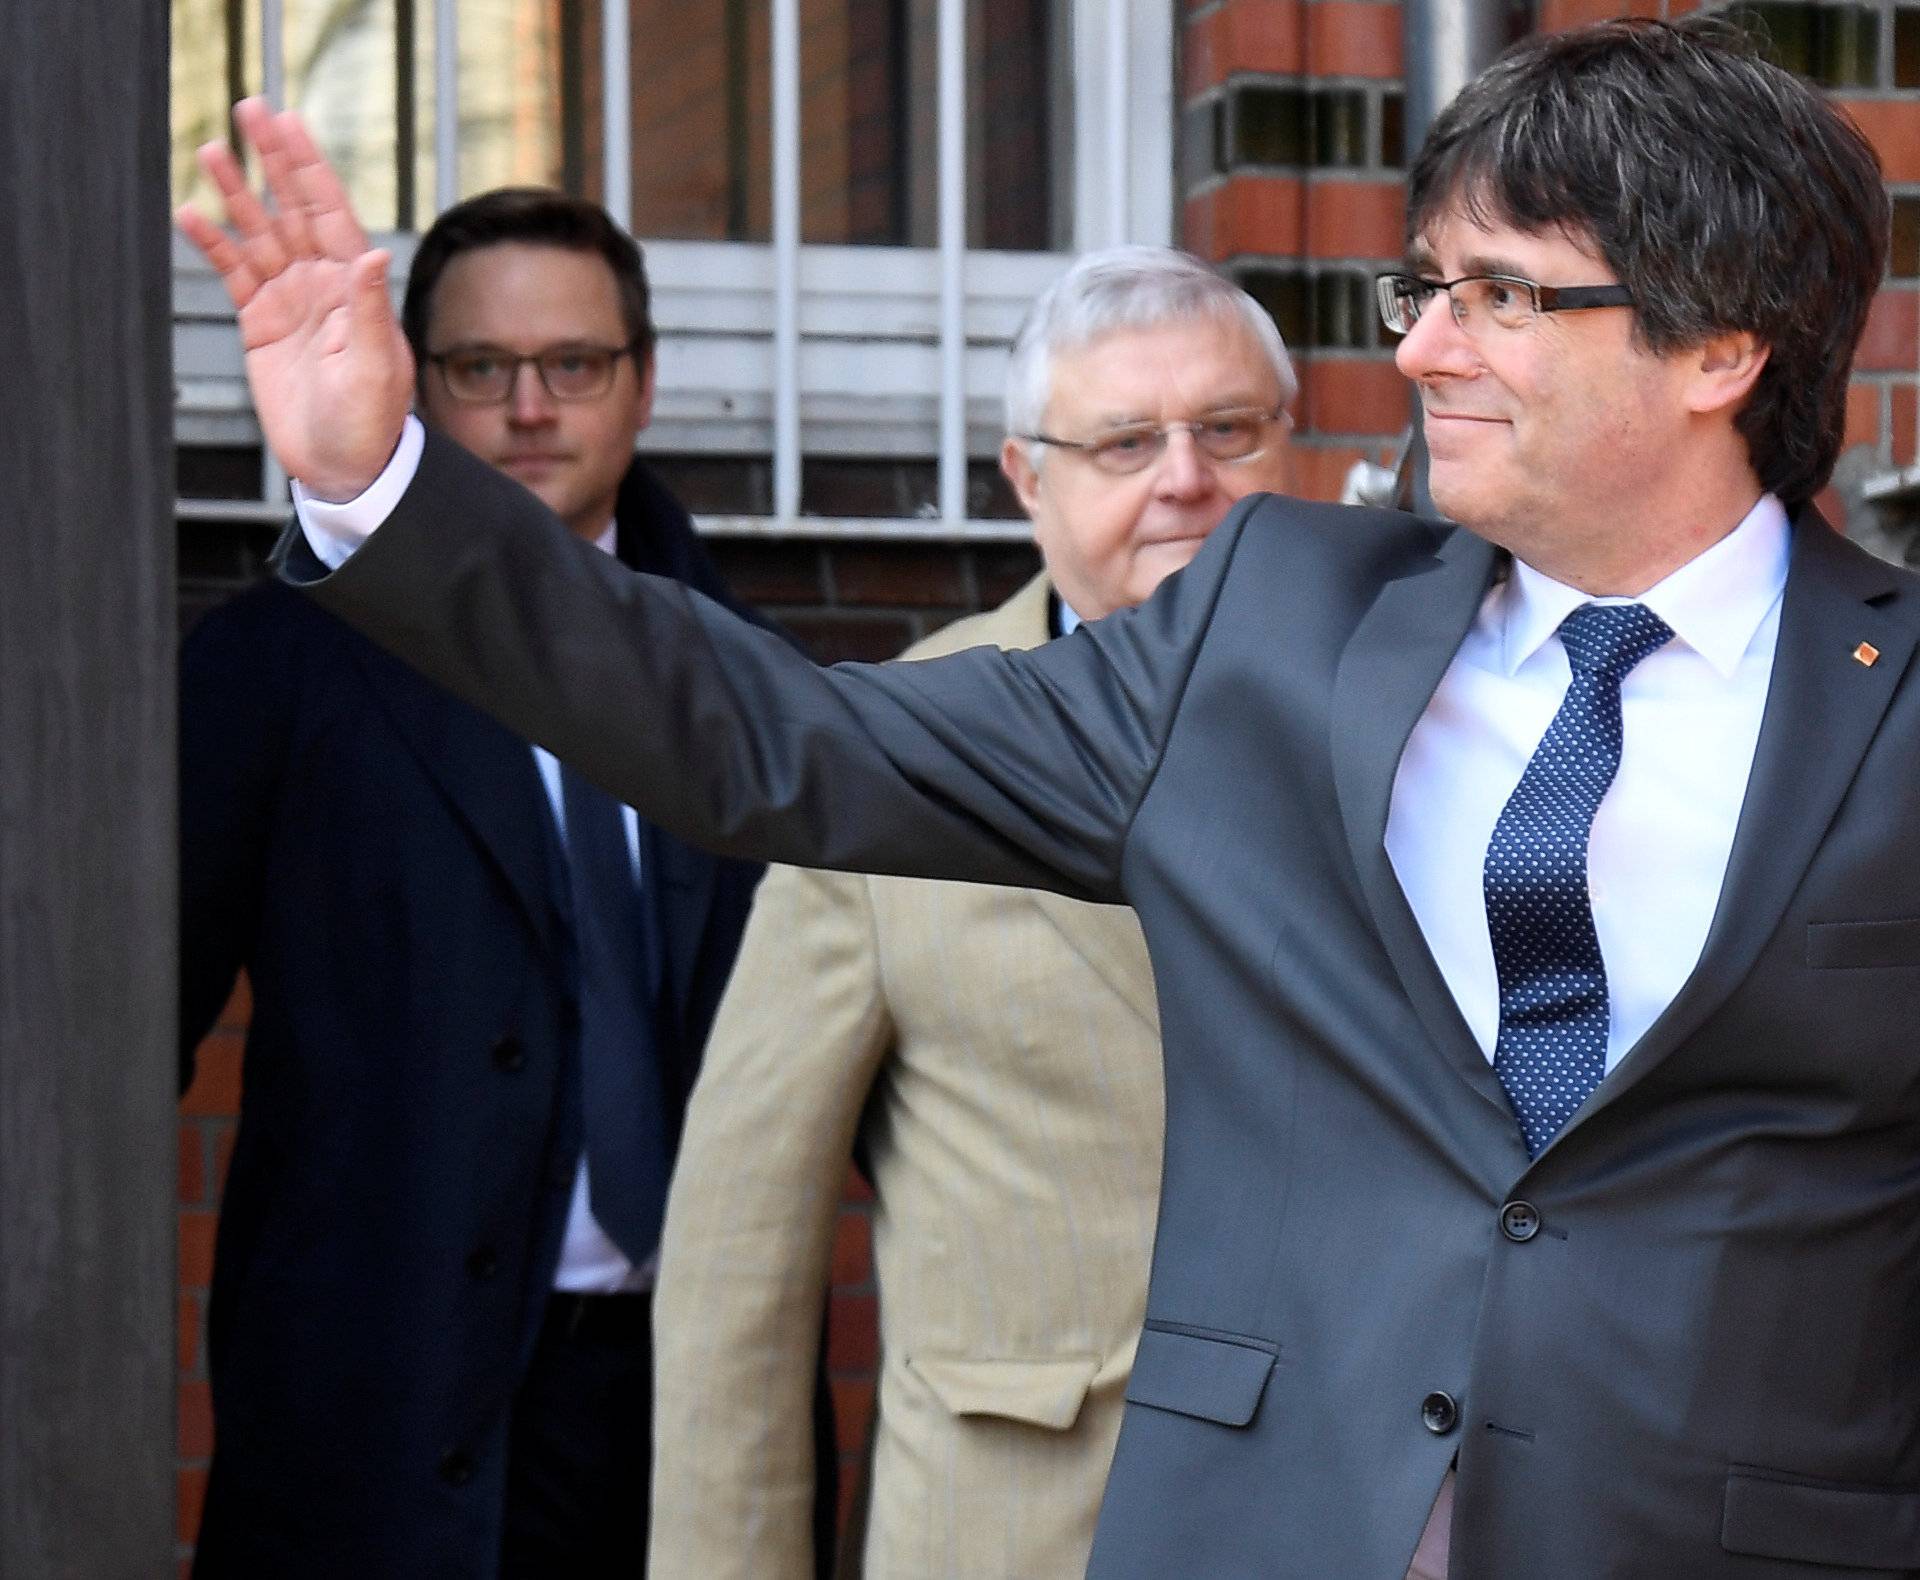 Catalonia's former leader Carles Puigdemont waves as he leaves the prison in Neumuenster